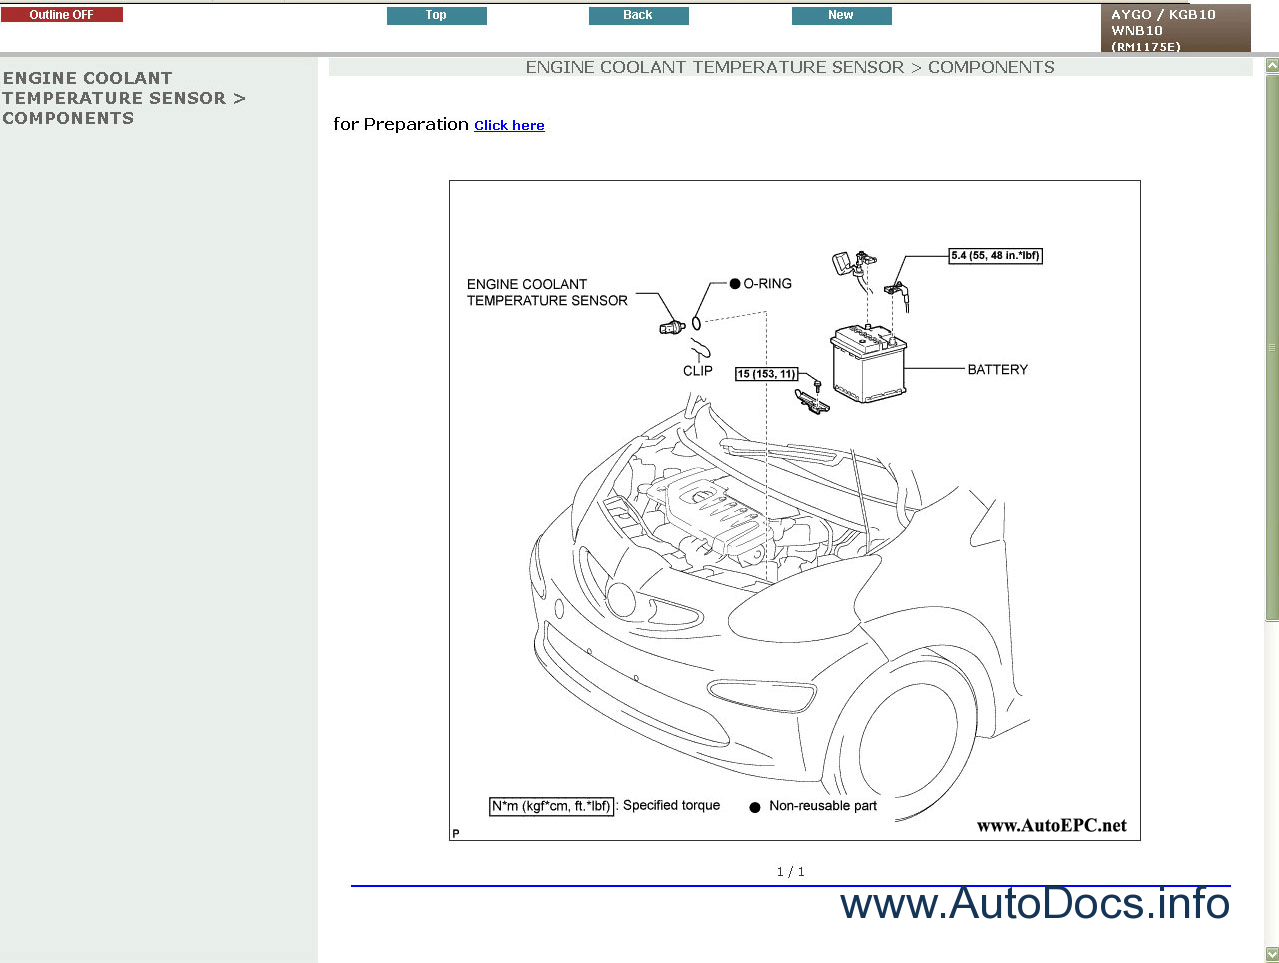 Zx14 Service Manual Download